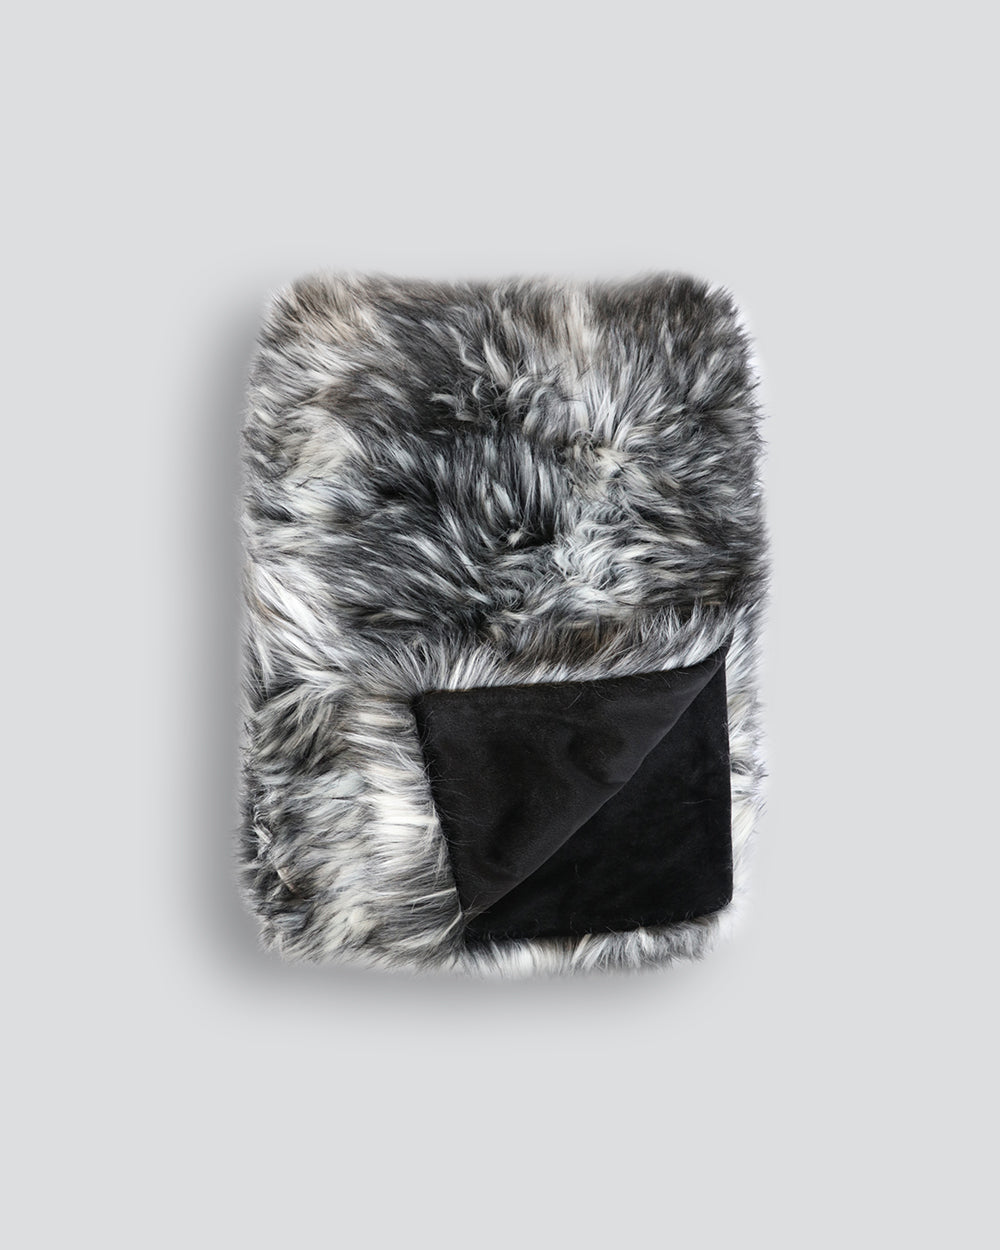 Heirloom Alaskan Wolf Throw Rug Blanket in Faux Fur is available from Make Your House A Home Premium Stockist. Furniture Store Bendigo, Victoria. Australia Wide Delivery.